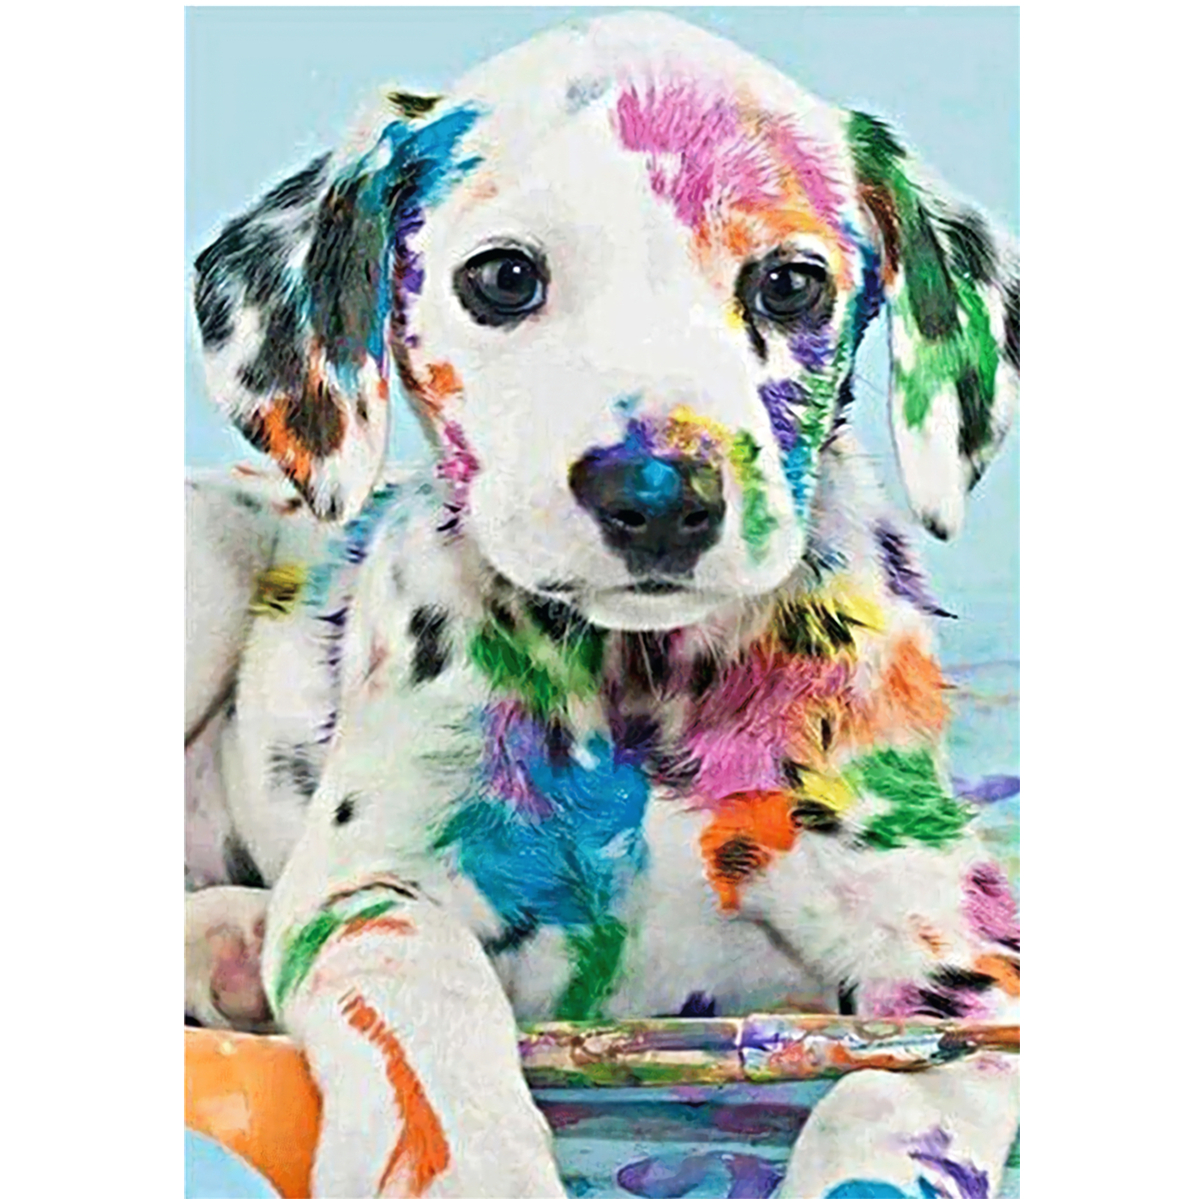 DIY-Diamond-Painting-Animal-Dog-Wall-Painting-Hanging-Pictures-Handmade-Wall-Decorations-Gifts-Drawi-1744046-1